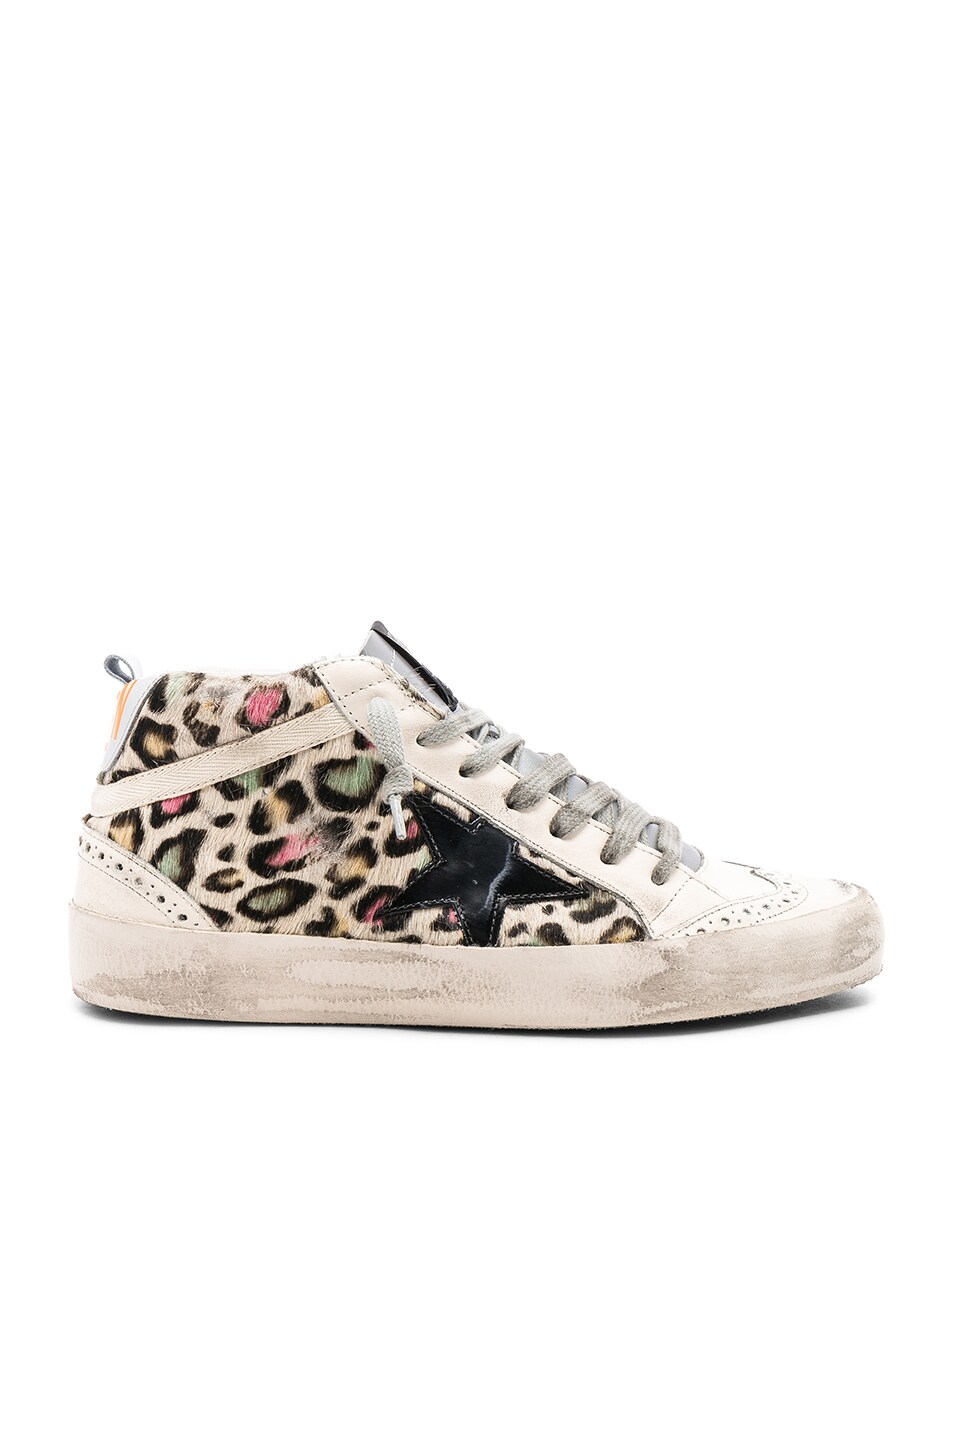 Image 1 of Golden Goose Cow Fur Mid Star Sneakers in Multicolor & Black